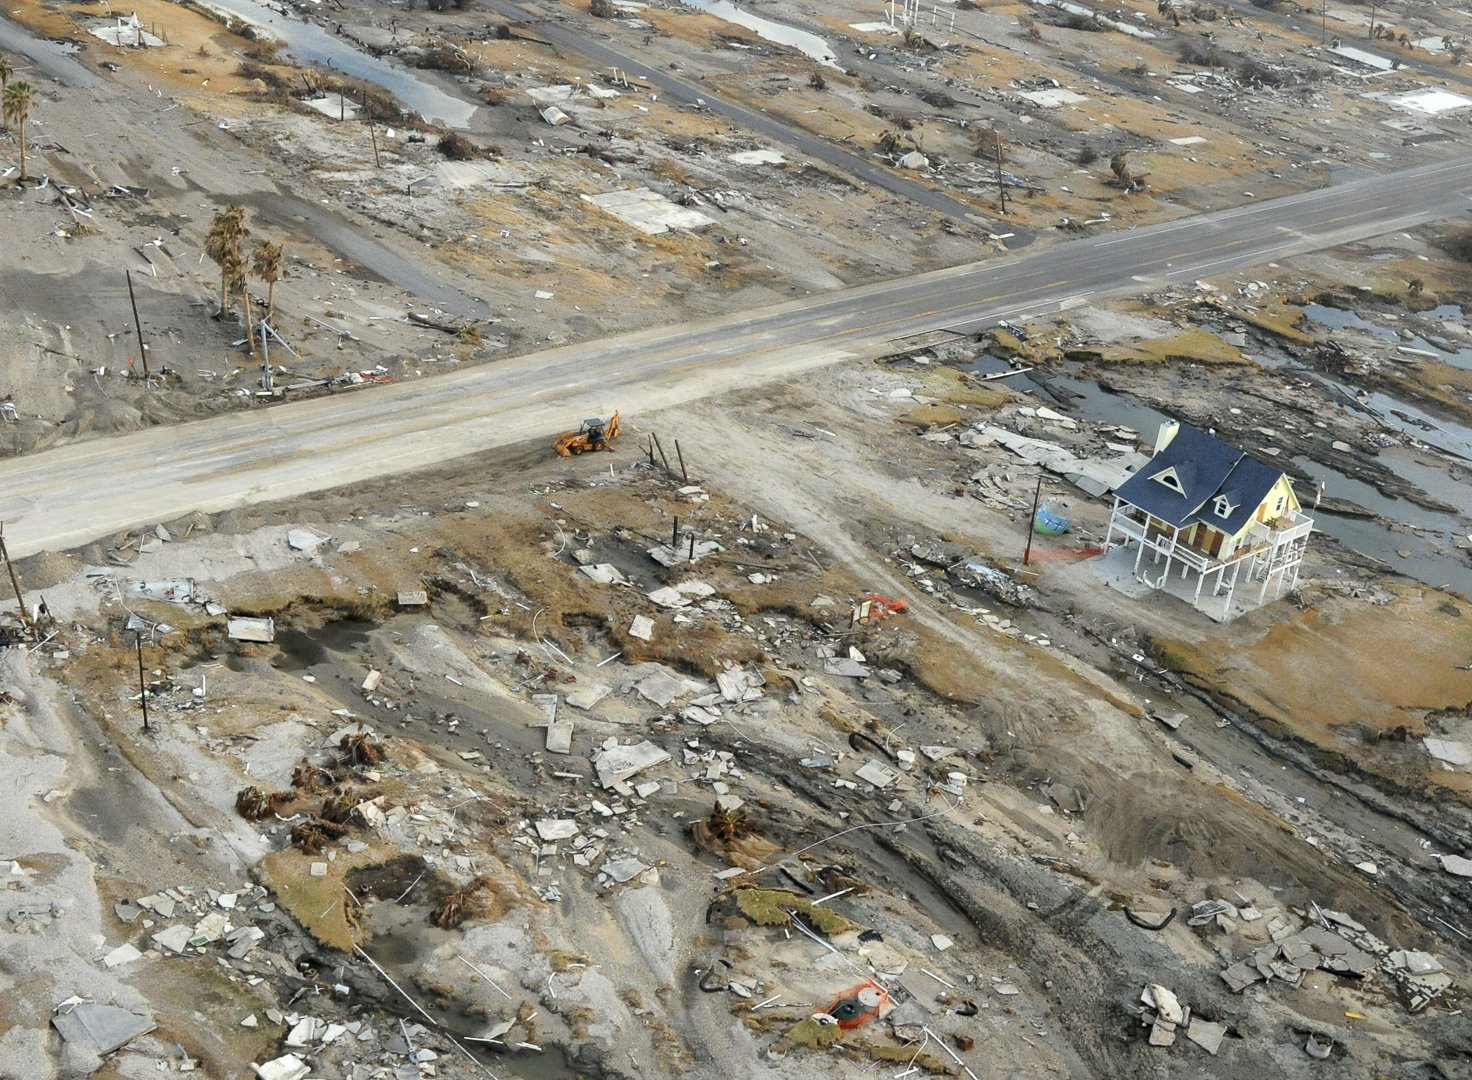 An aerial view of the damage Hurricane Ike inflicted upon Gilchrist, Texas (by Jocelyn Augusitno/FEMA, Public domain, via Wikimedia Commons).